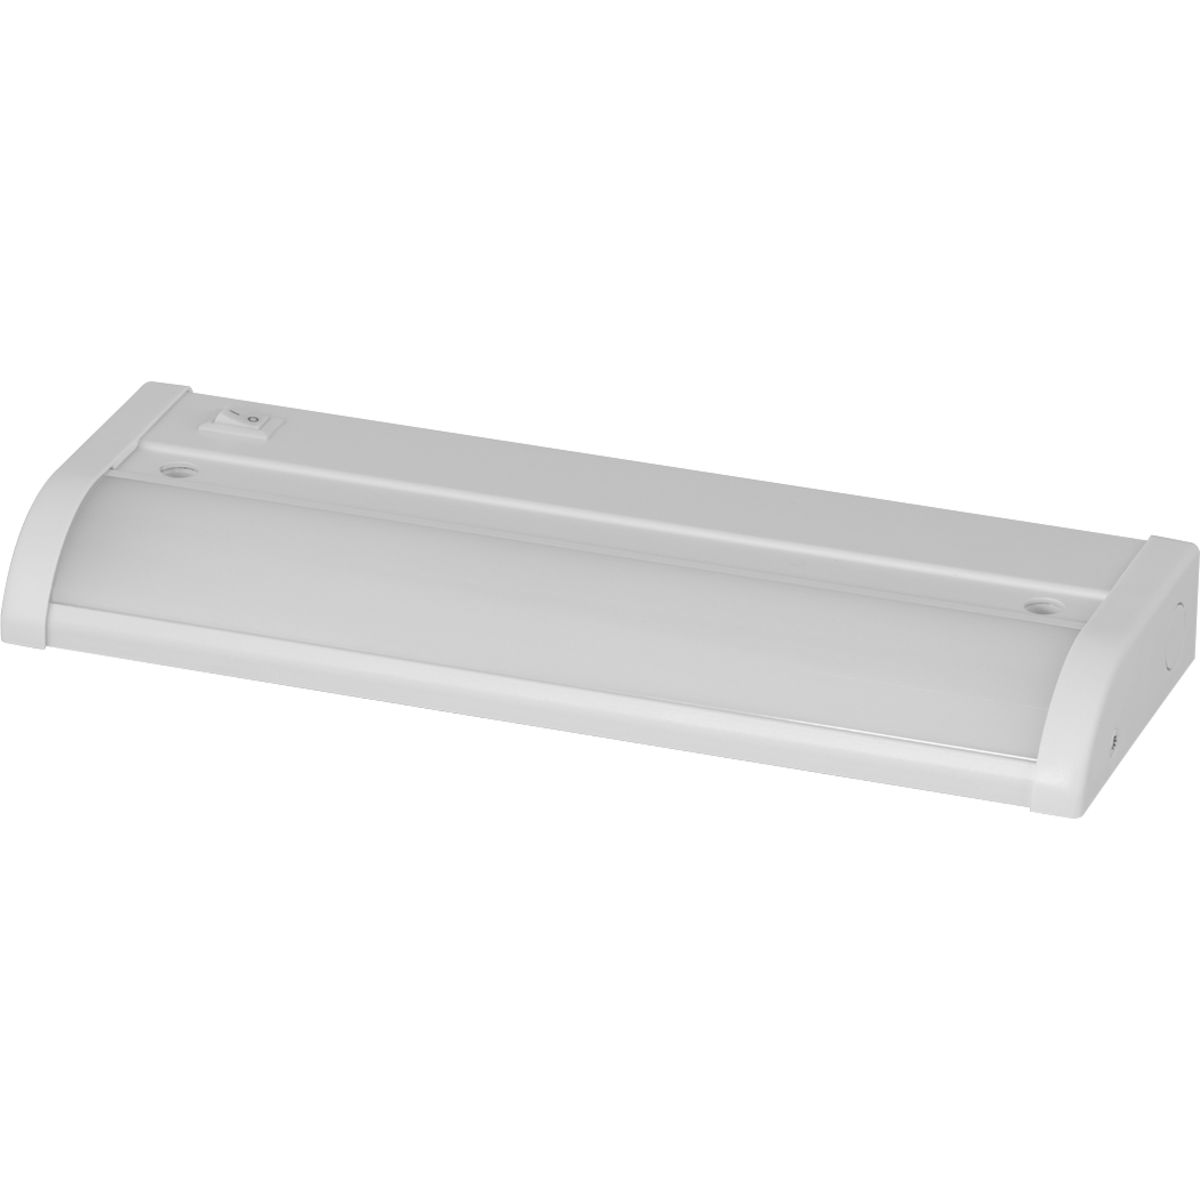 The HIDE-A-LITE V 9 in linear undercabinet fixture provides the ideal solution for residential and light commercial applications. Extruded aluminum construction featuring a lens design to optimizes light distribution to ensure proper illumination. The HIDE-A-LITE V series utilizes a simple mounting method, and direct wiring, for a hassle free installation. Energy efficient and functional lighting, which can be dimmed down to 10 percent with many Forward Phase Triac and Electronic Low Voltage ELV dimmers. 9 in linear undercabinet fixture. White powder coat finish.